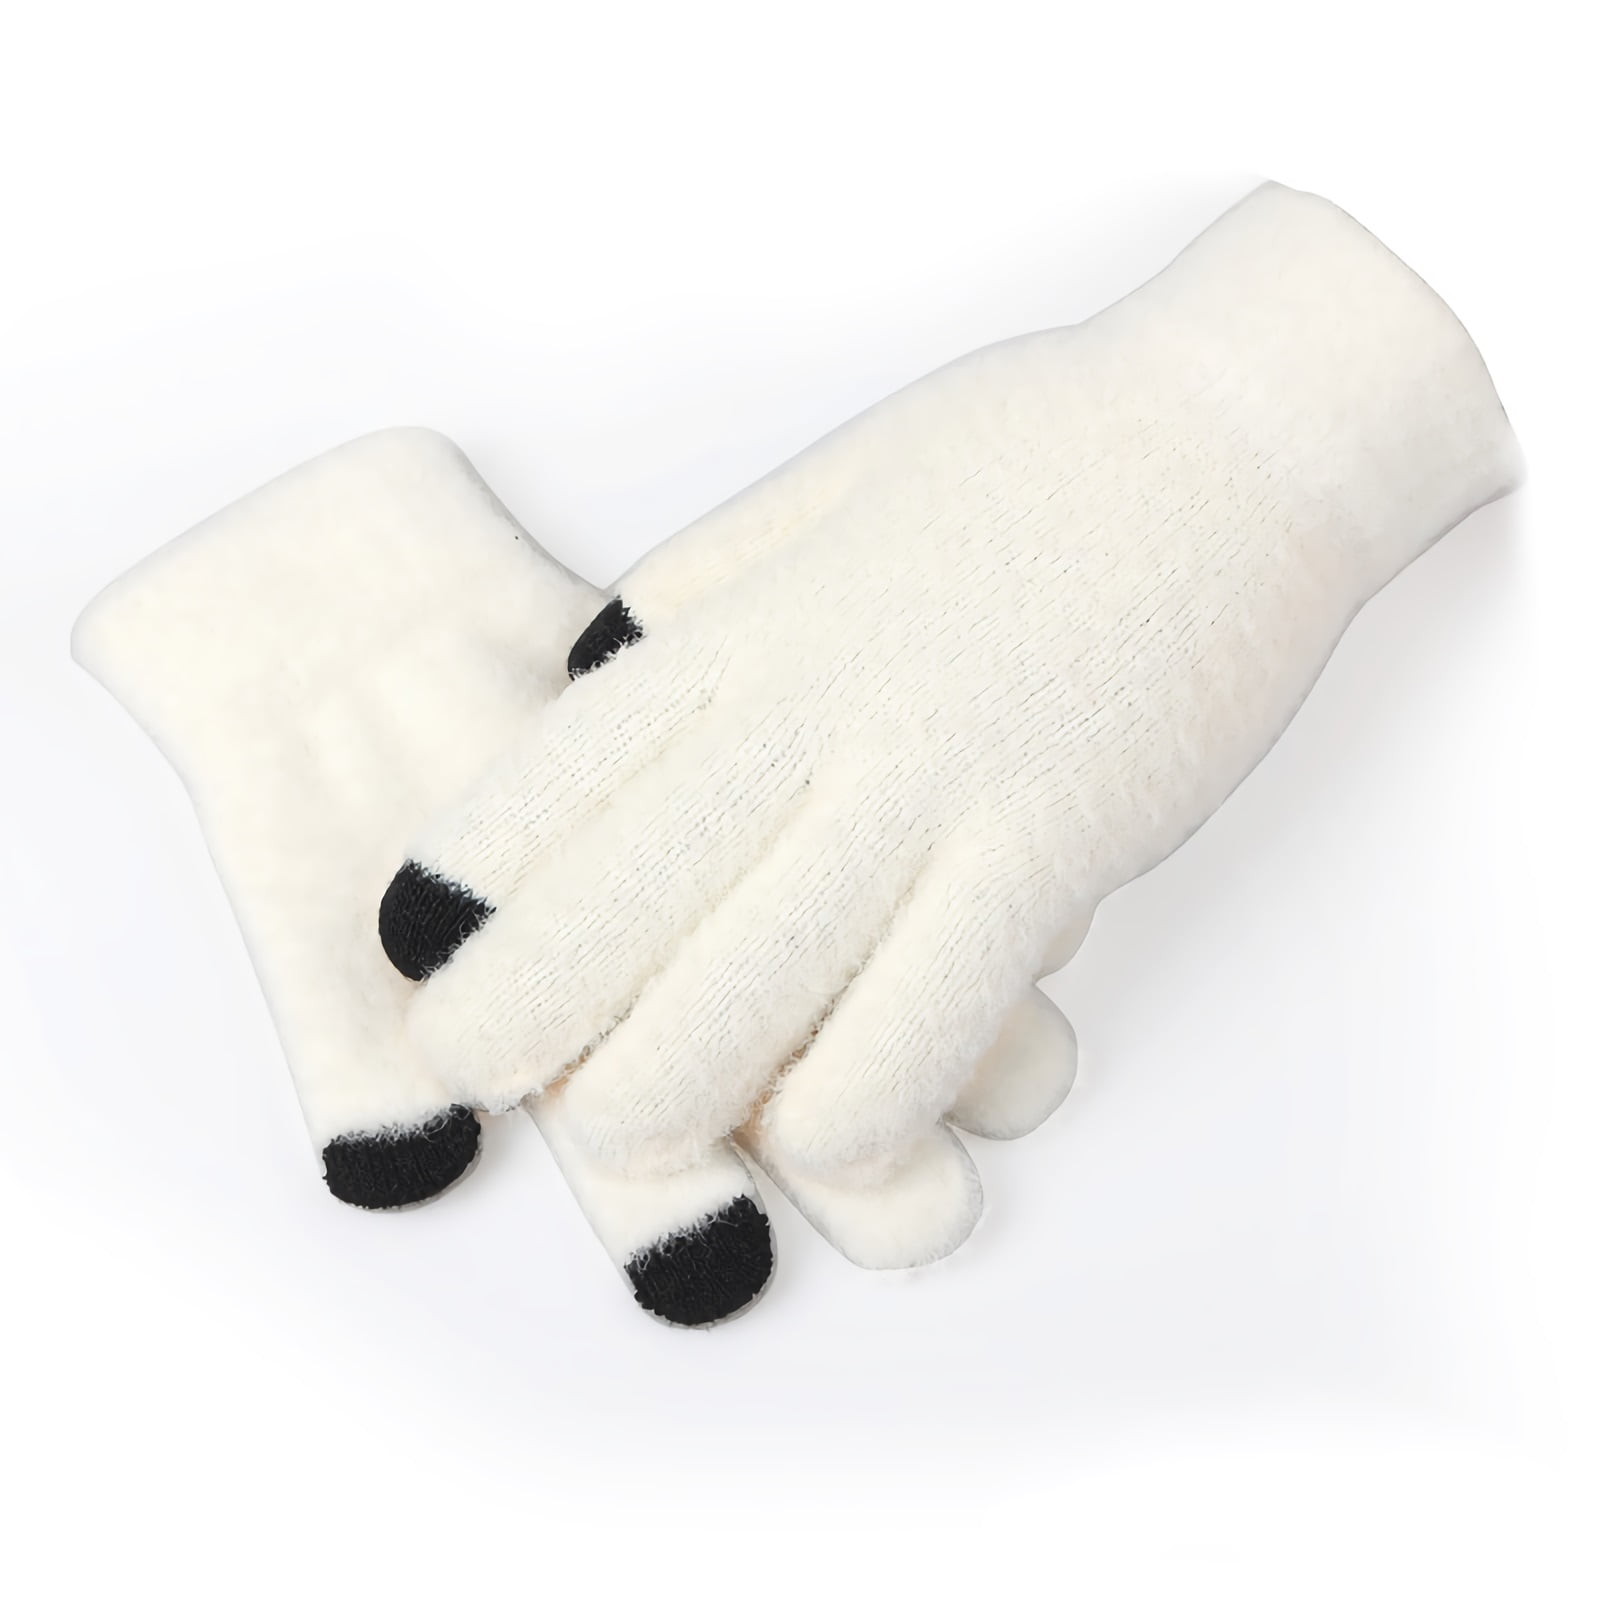 Mythic Fashions Unisex Adults Warm Magic Stretch Palm Gripper Outdoor Driving Thermal Gloves